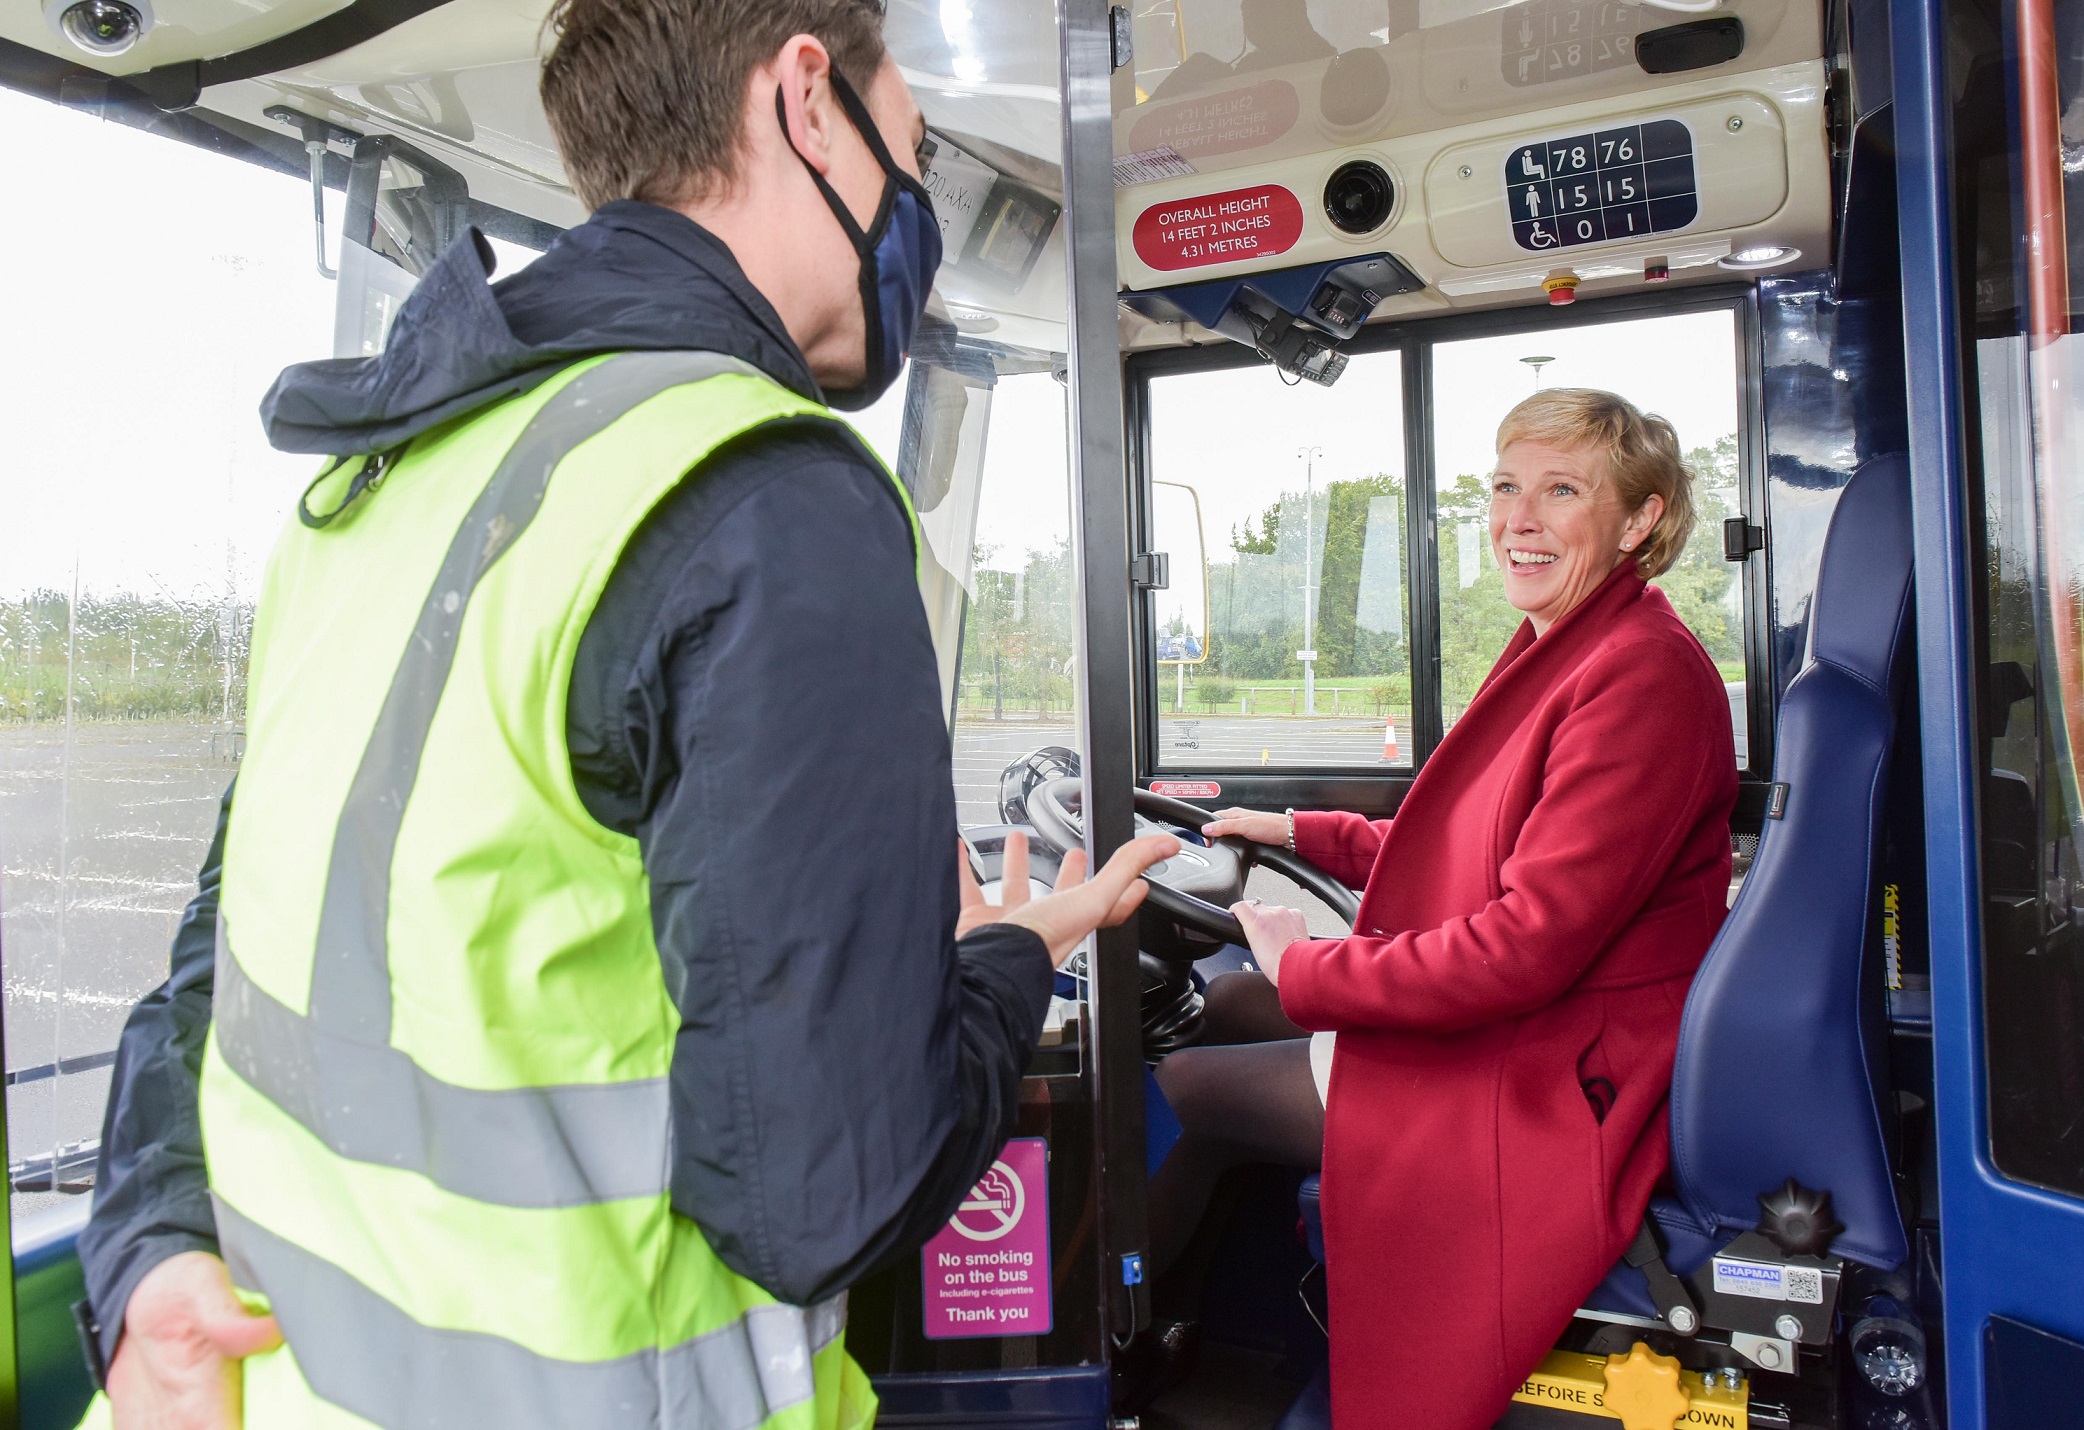 Baroness Vere retains coach and bus ministerial responsibilities